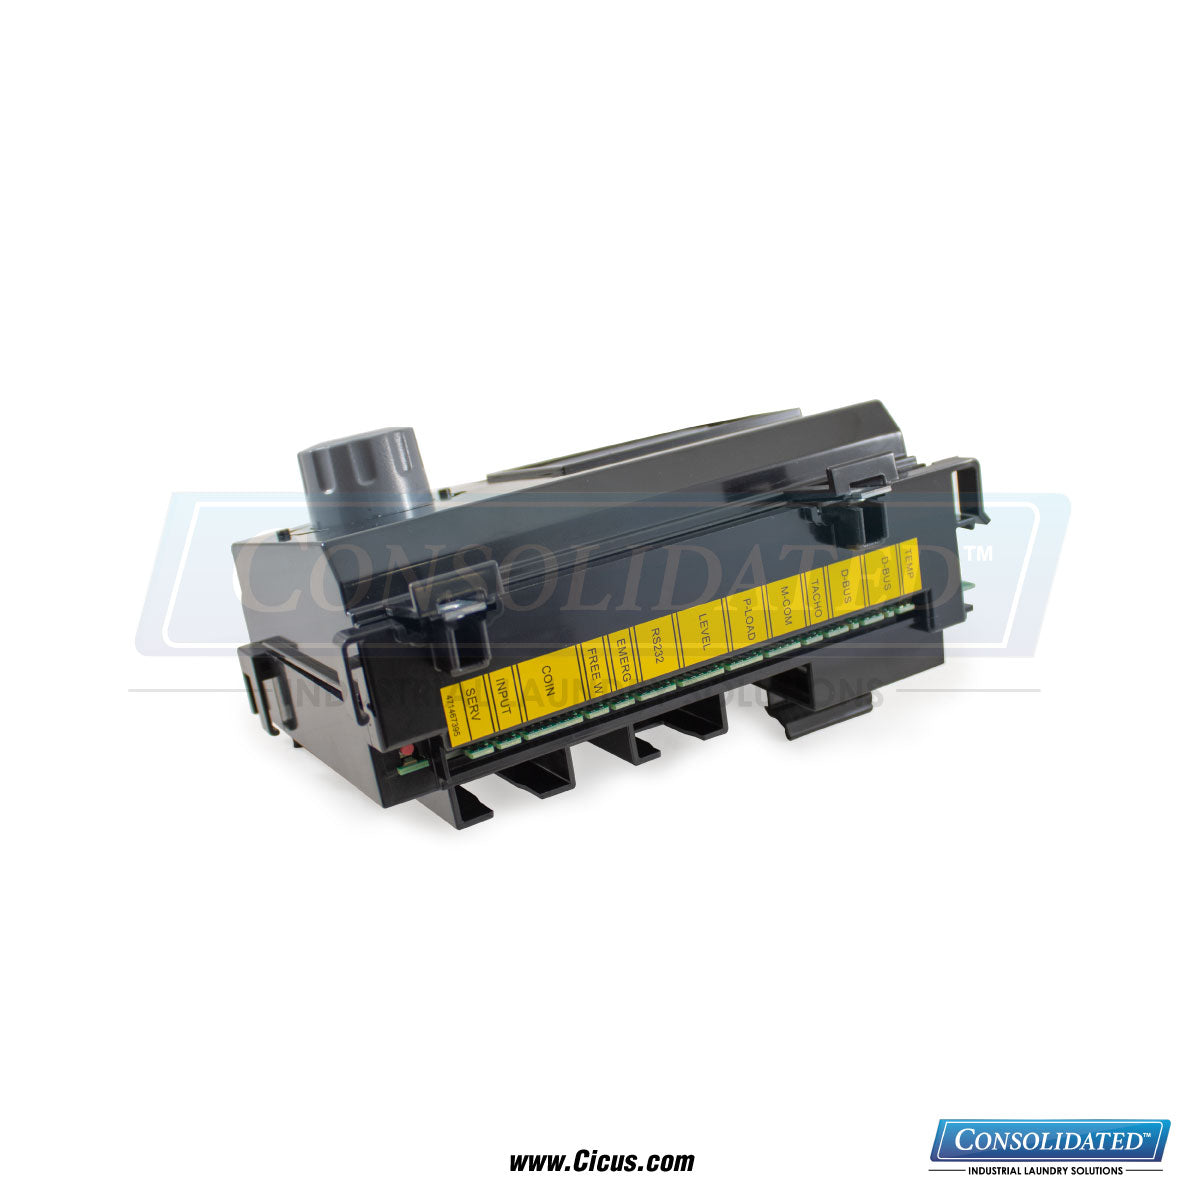 Electrolux Compass CPU Split Dbuss Assembly [432690206] - Rear View